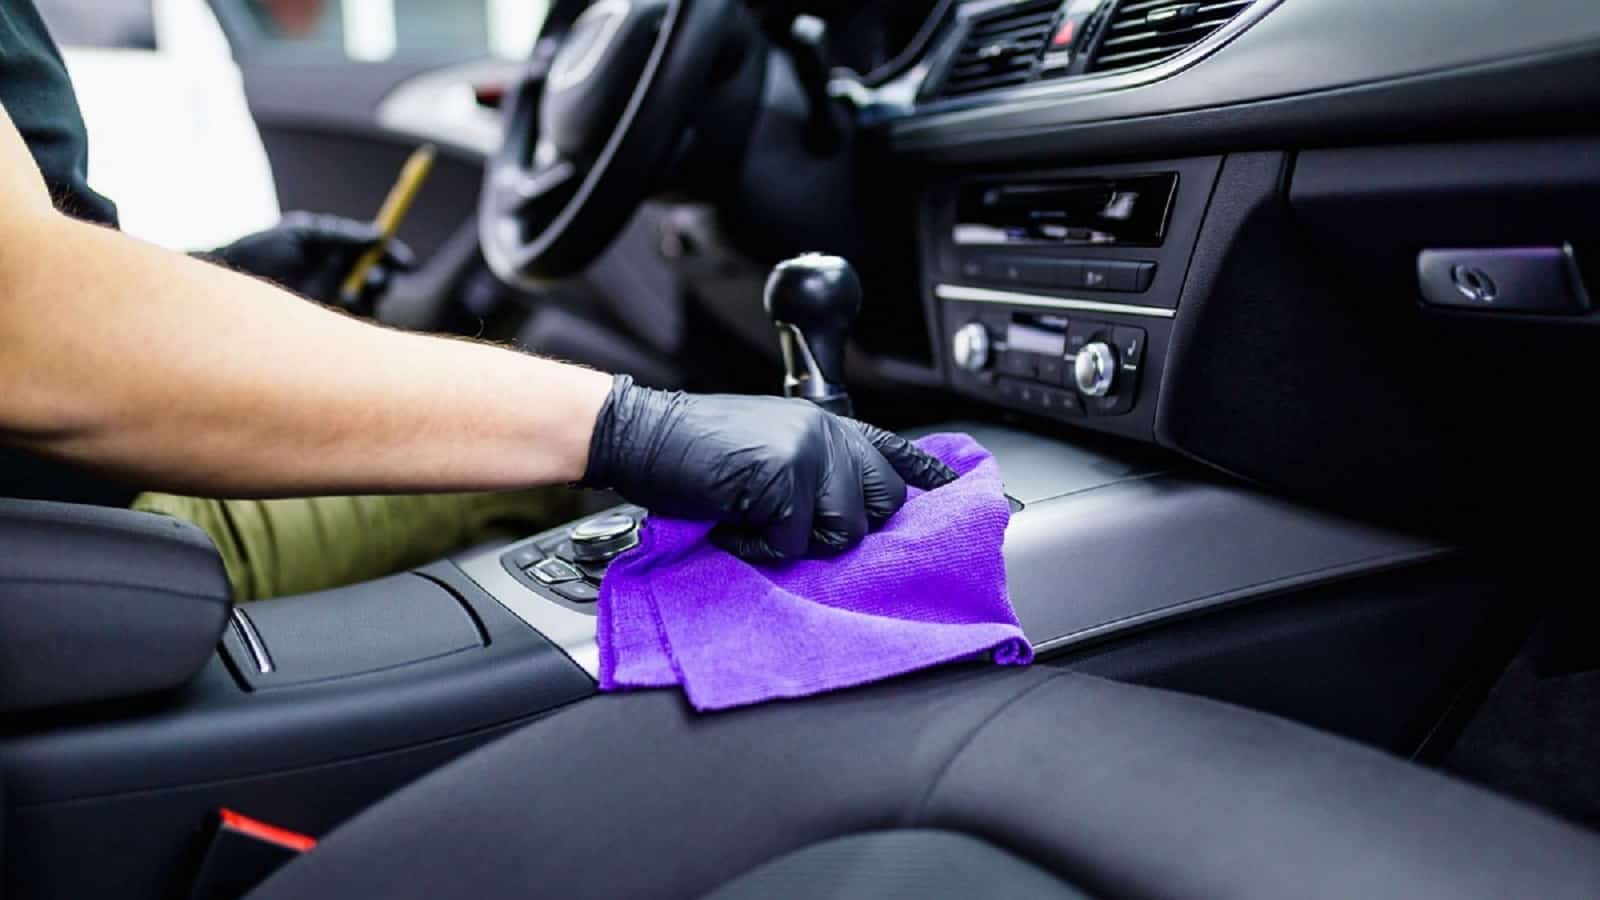 Cleaning and Disinfecting Cars Effectively During the Covid-19 Season High-class Garage Thanh Phong Auto HCM 2022